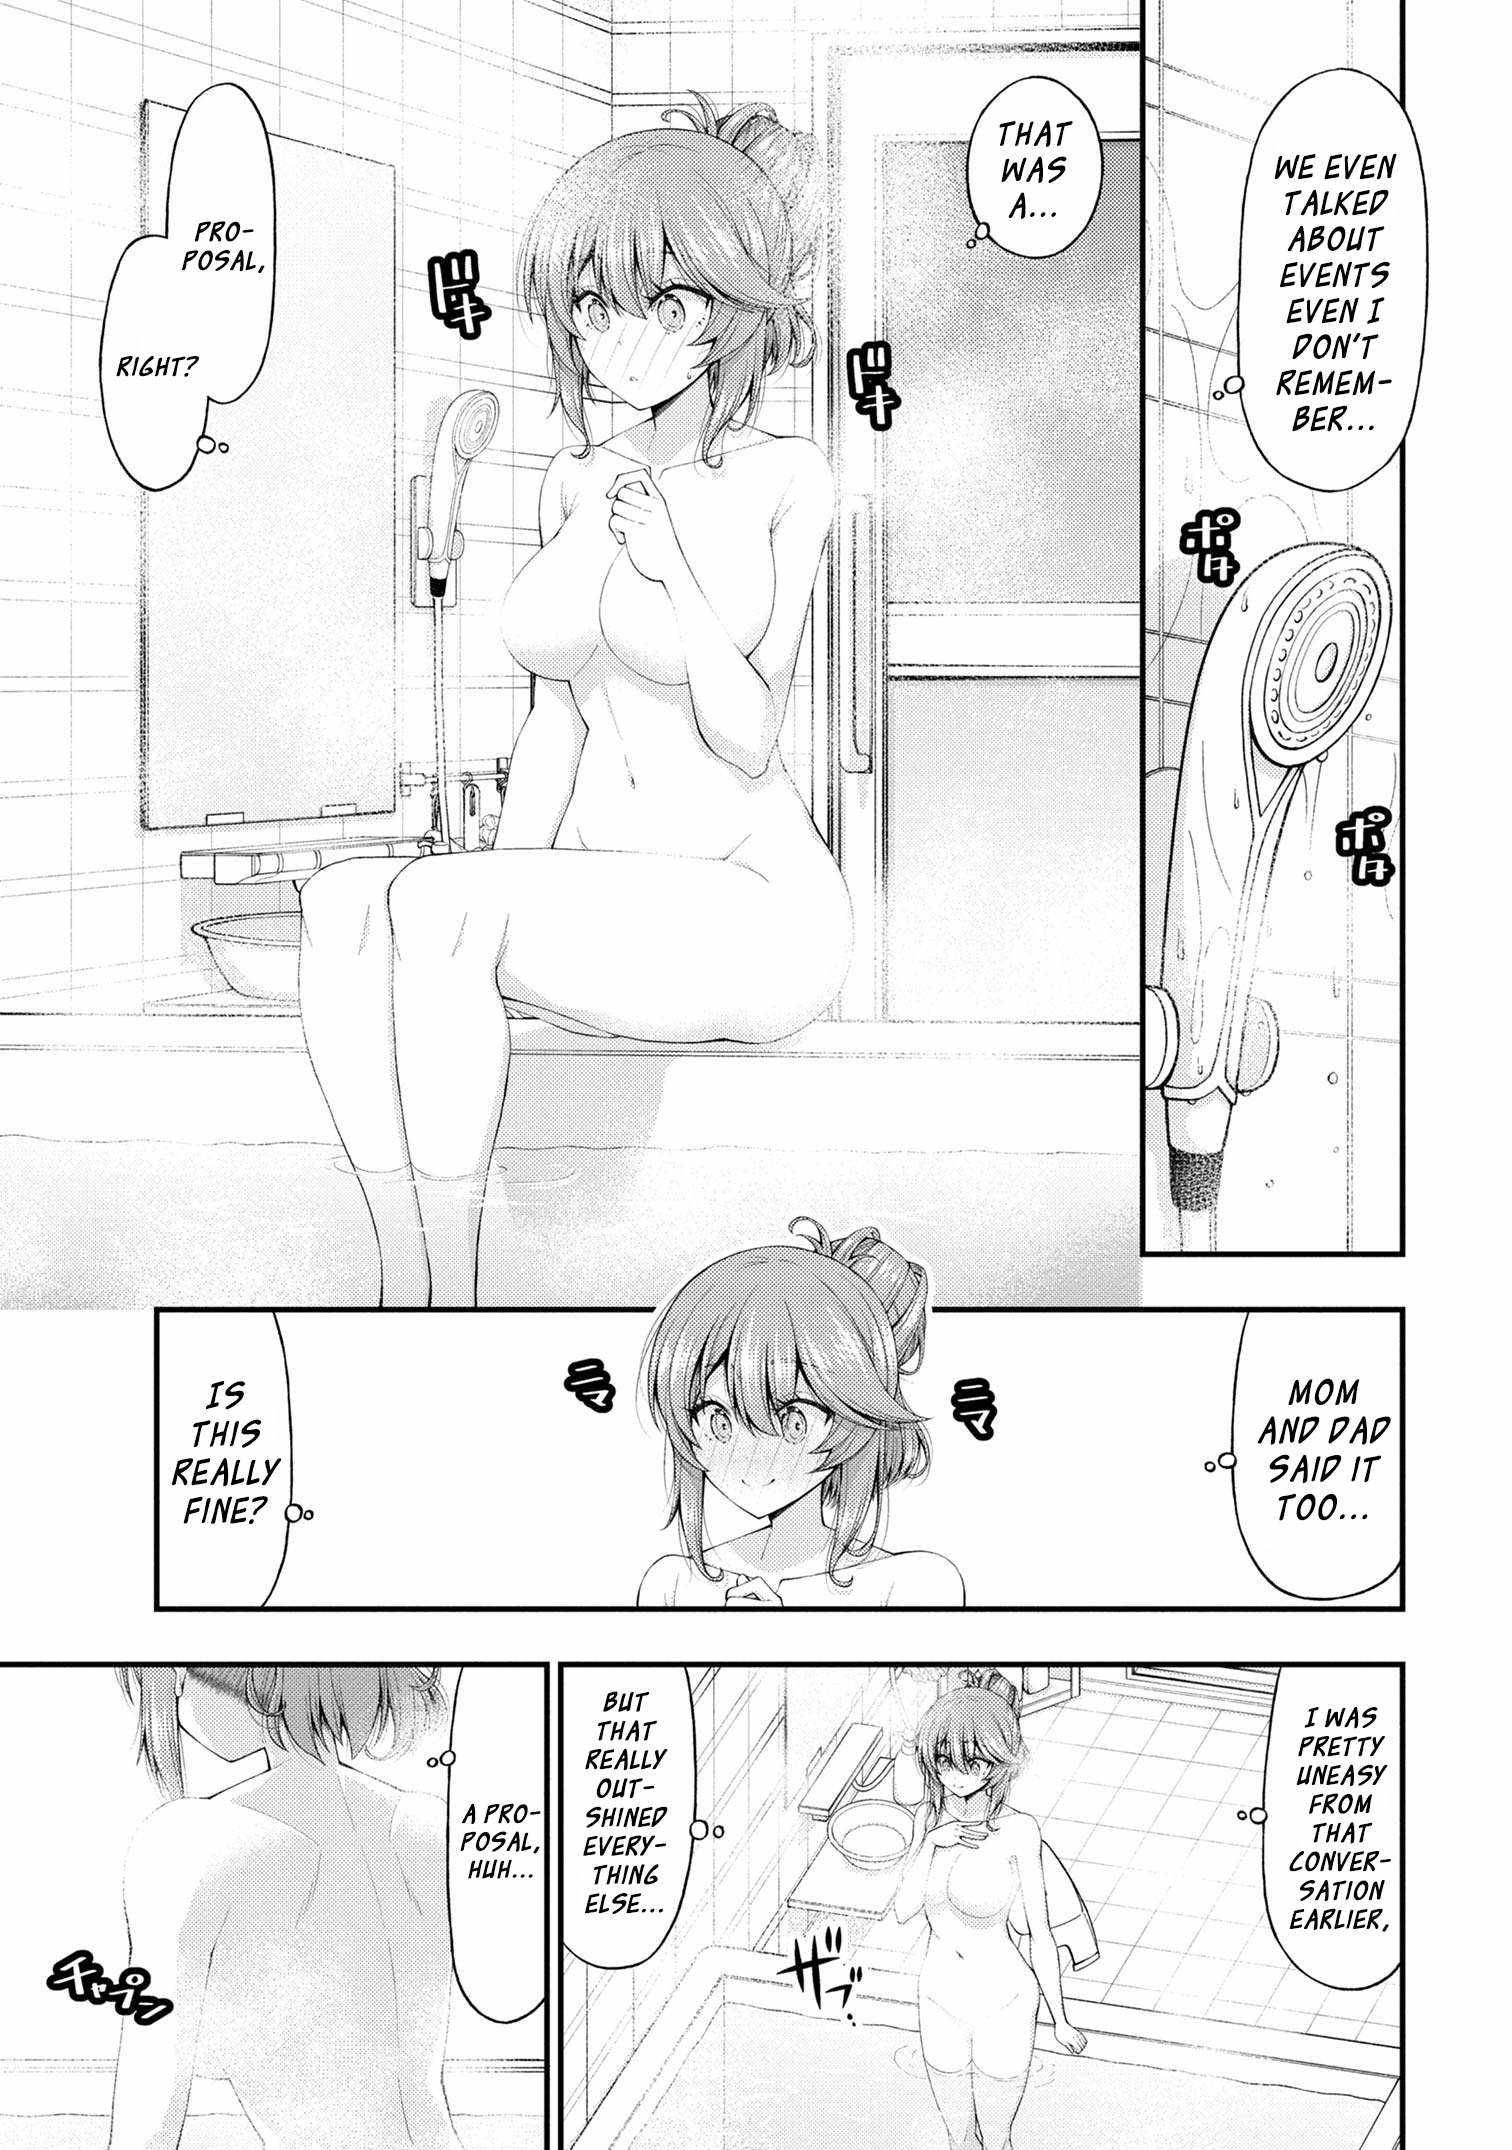 The Gal Who Was Meant to Confess to Me as a Game Punishment Has Apparently Fallen in Love with Me Chapter 12-5-eng-li - Page 2